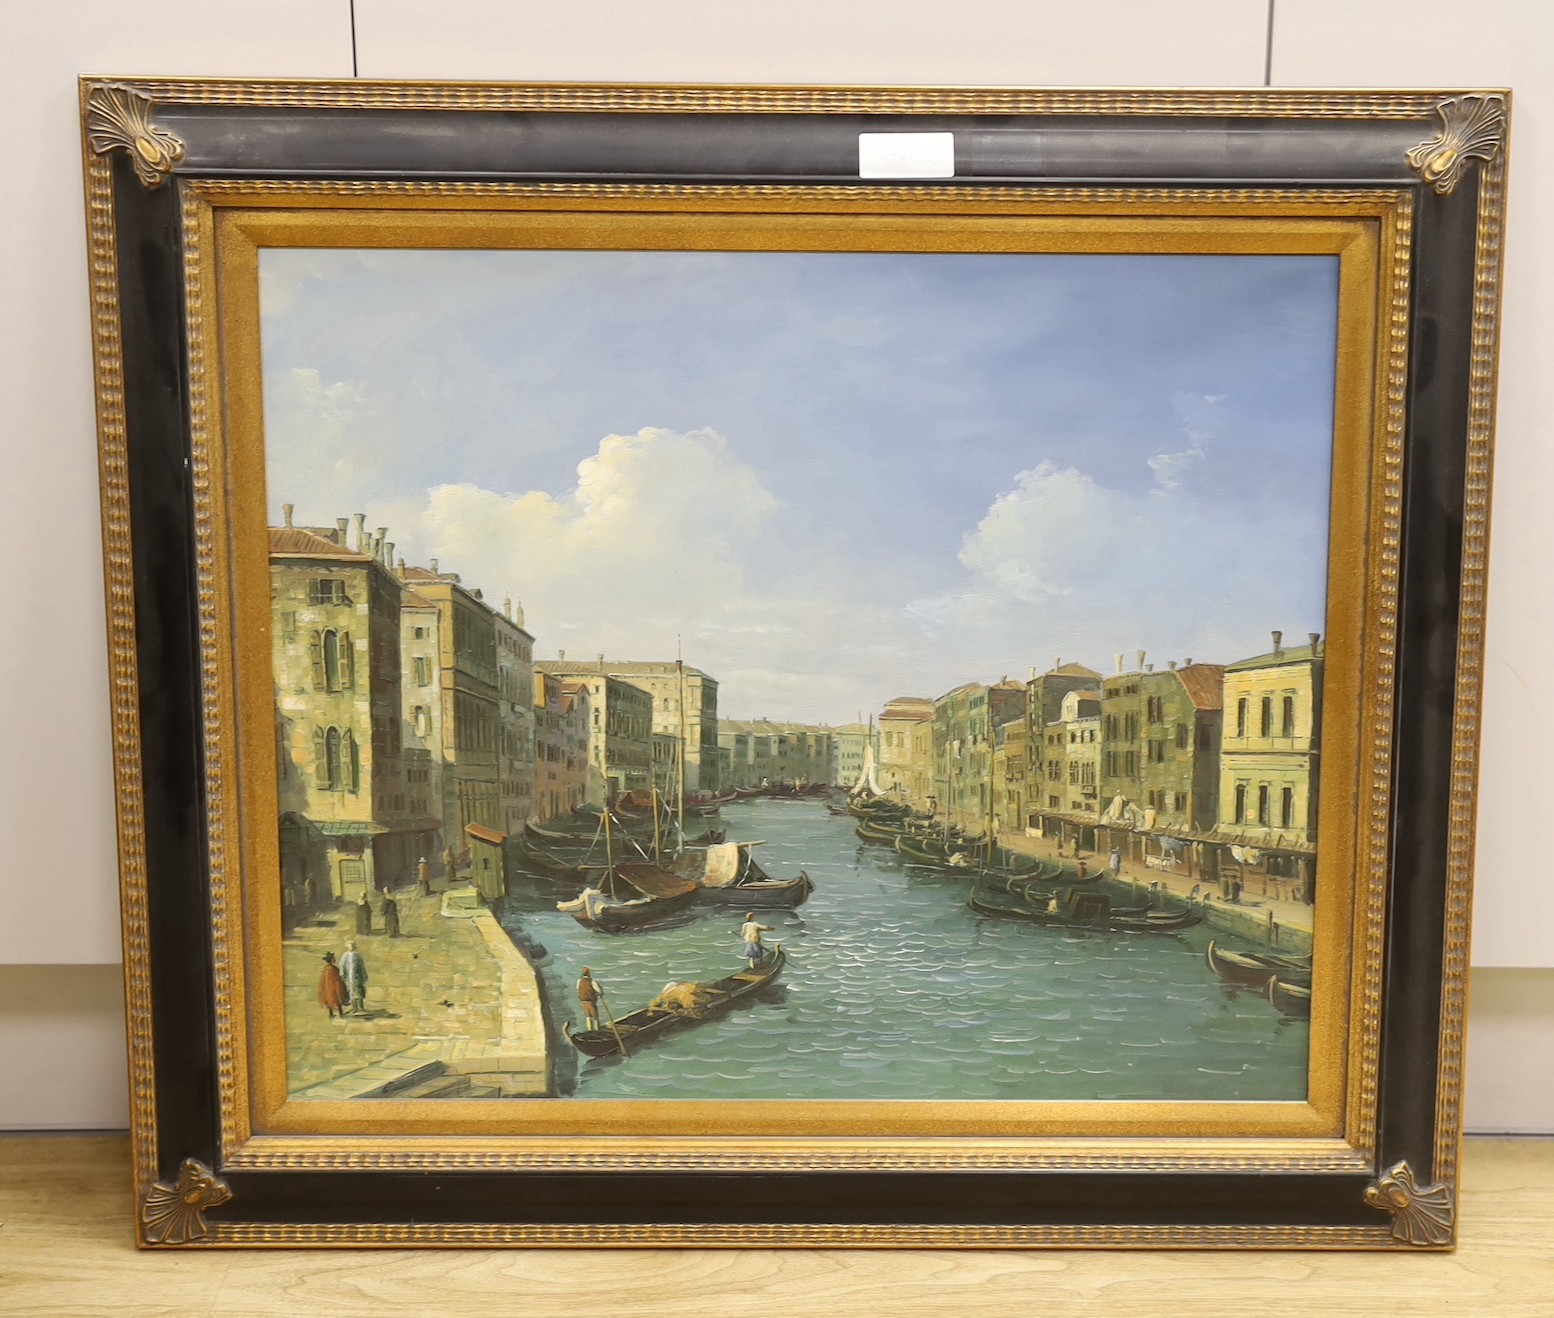 After Canaletto, oil on canvas, Venetian canal scene, 50 x 60cm